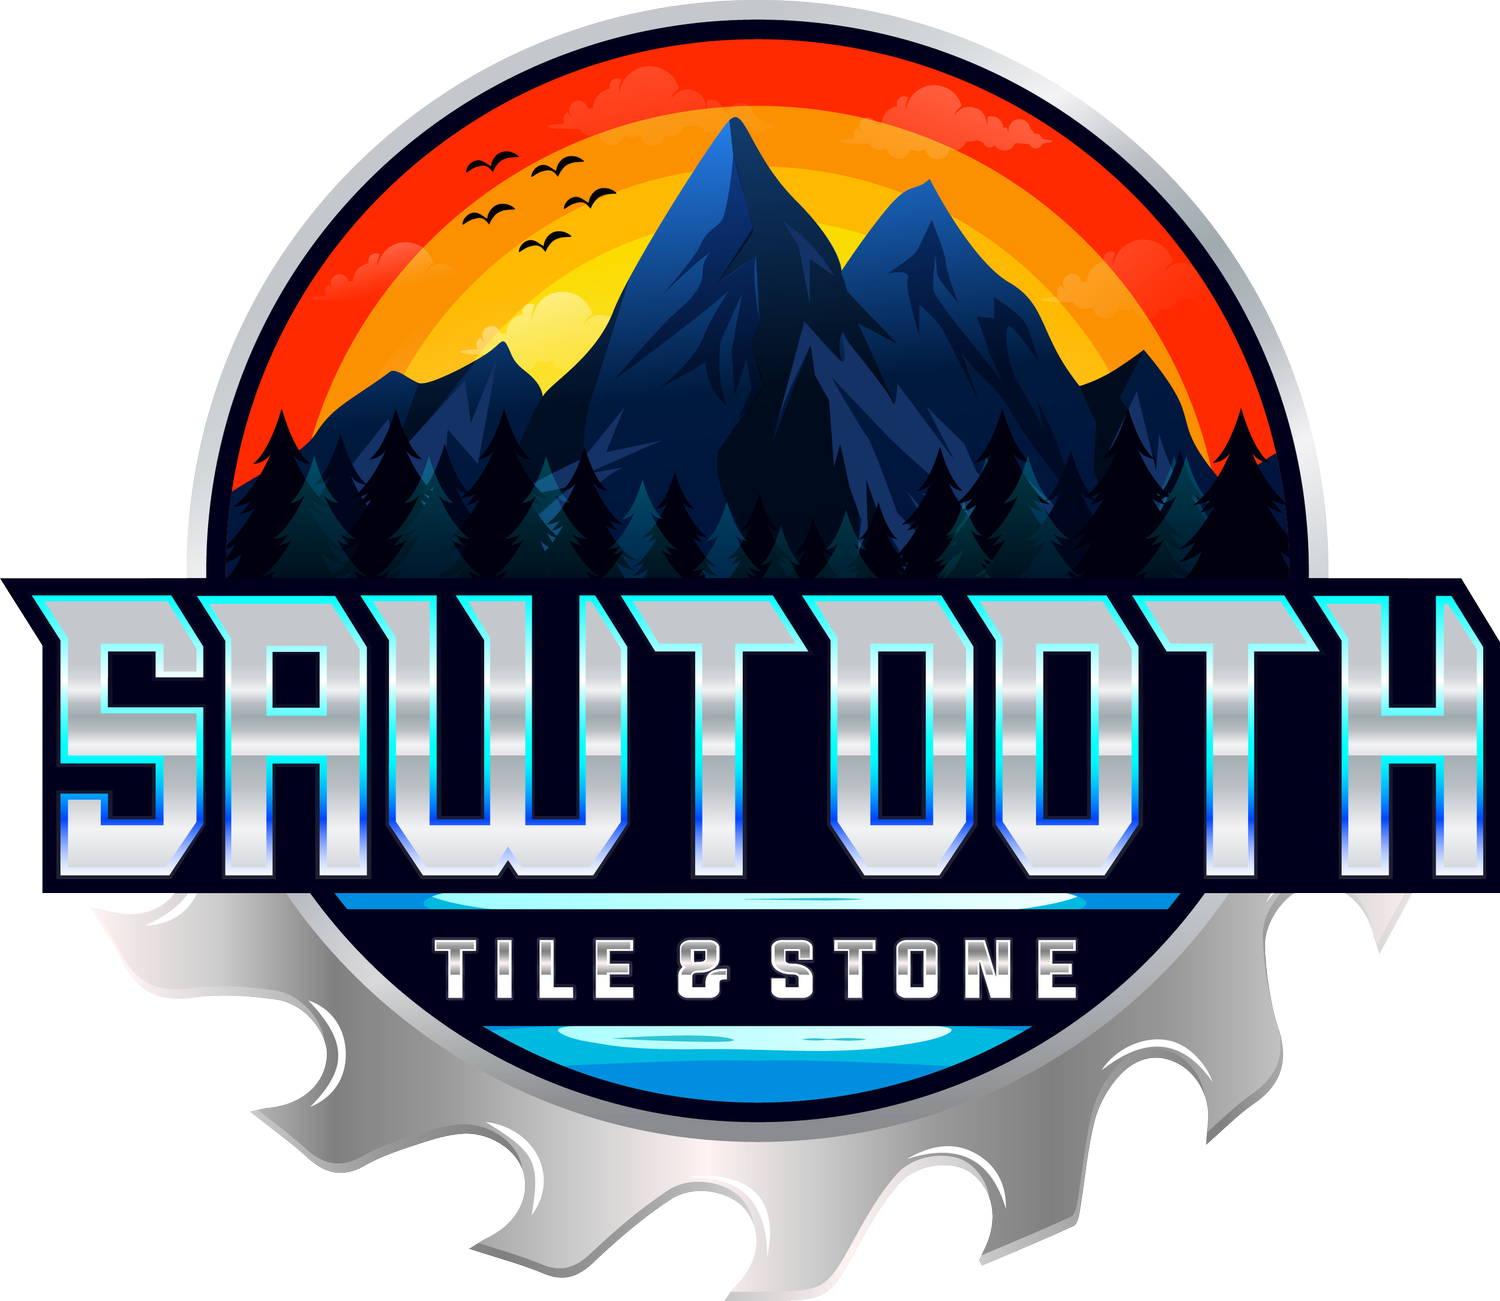 Sawtooth Tile and Stone